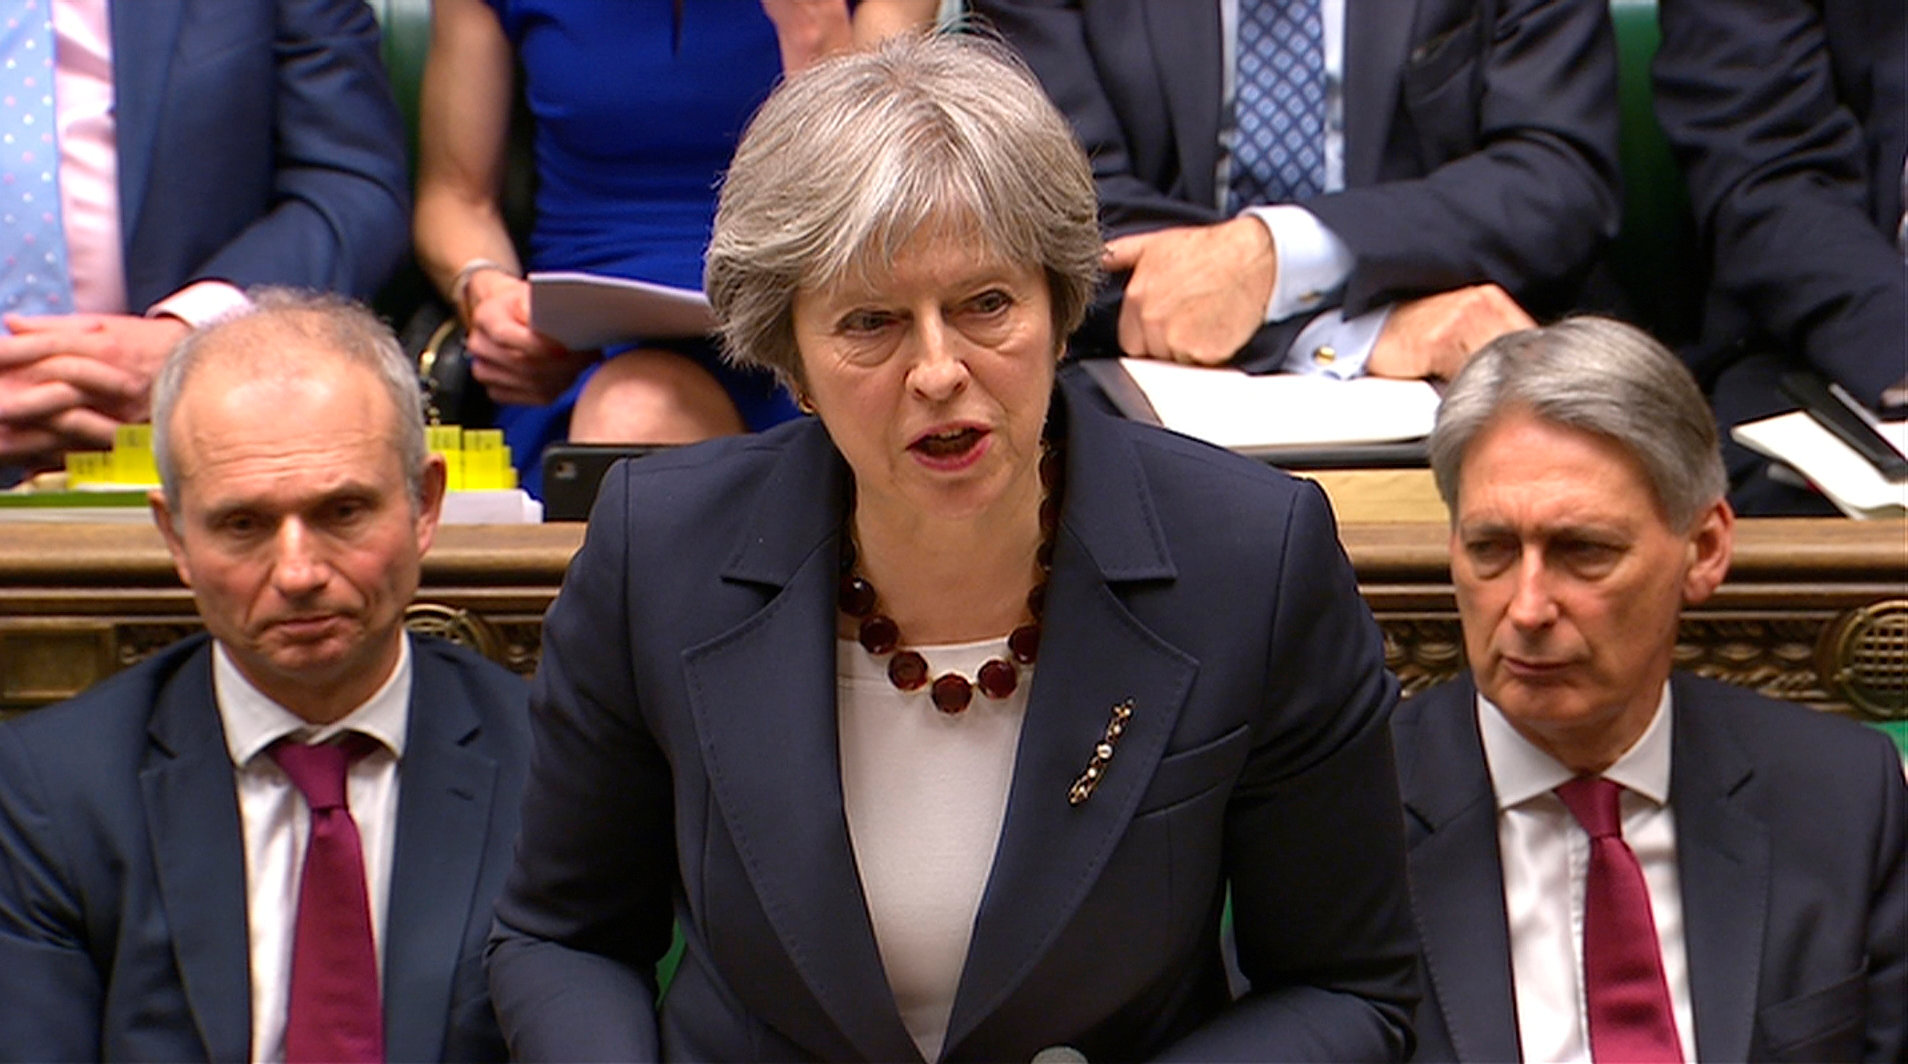 Britain's Prime Minister Theresa May addresses the House of Commons on her government's reaction to the poisoning of former Russian intelligence officer Sergei Skripal and his daughter Yulia in Salisbury, in London